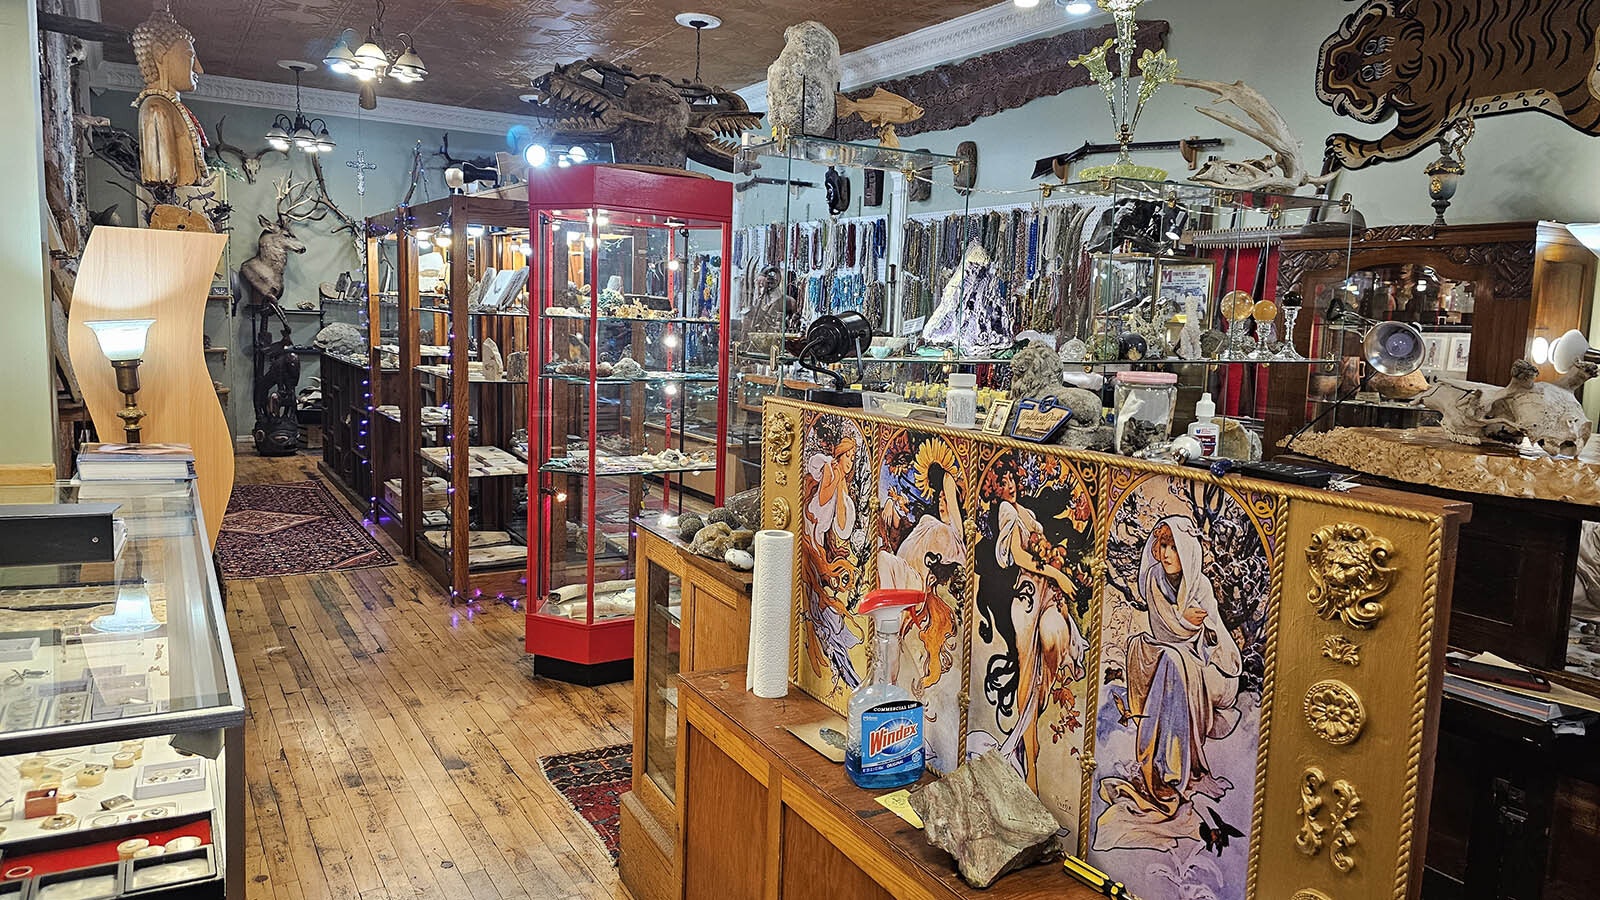 The Bohemian Metals Shop in Cheyenne is filled with curiosities from all over the world.